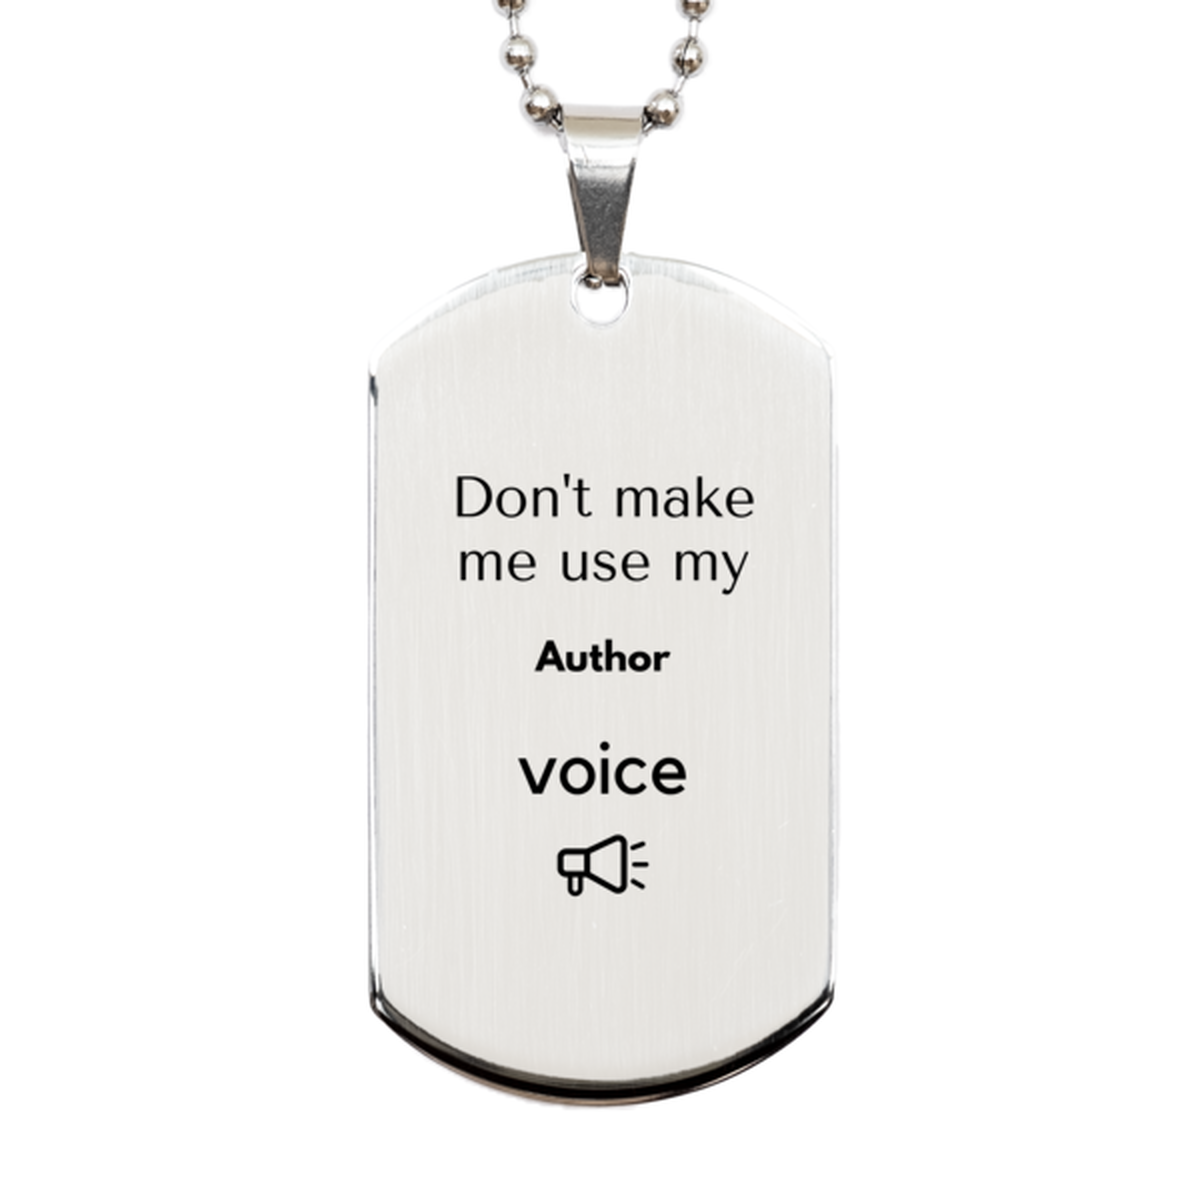 Don't make me use my Author voice, Sarcasm Author Gifts, Christmas Author Silver Dog Tag Birthday Unique Gifts For Author Coworkers, Men, Women, Colleague, Friends